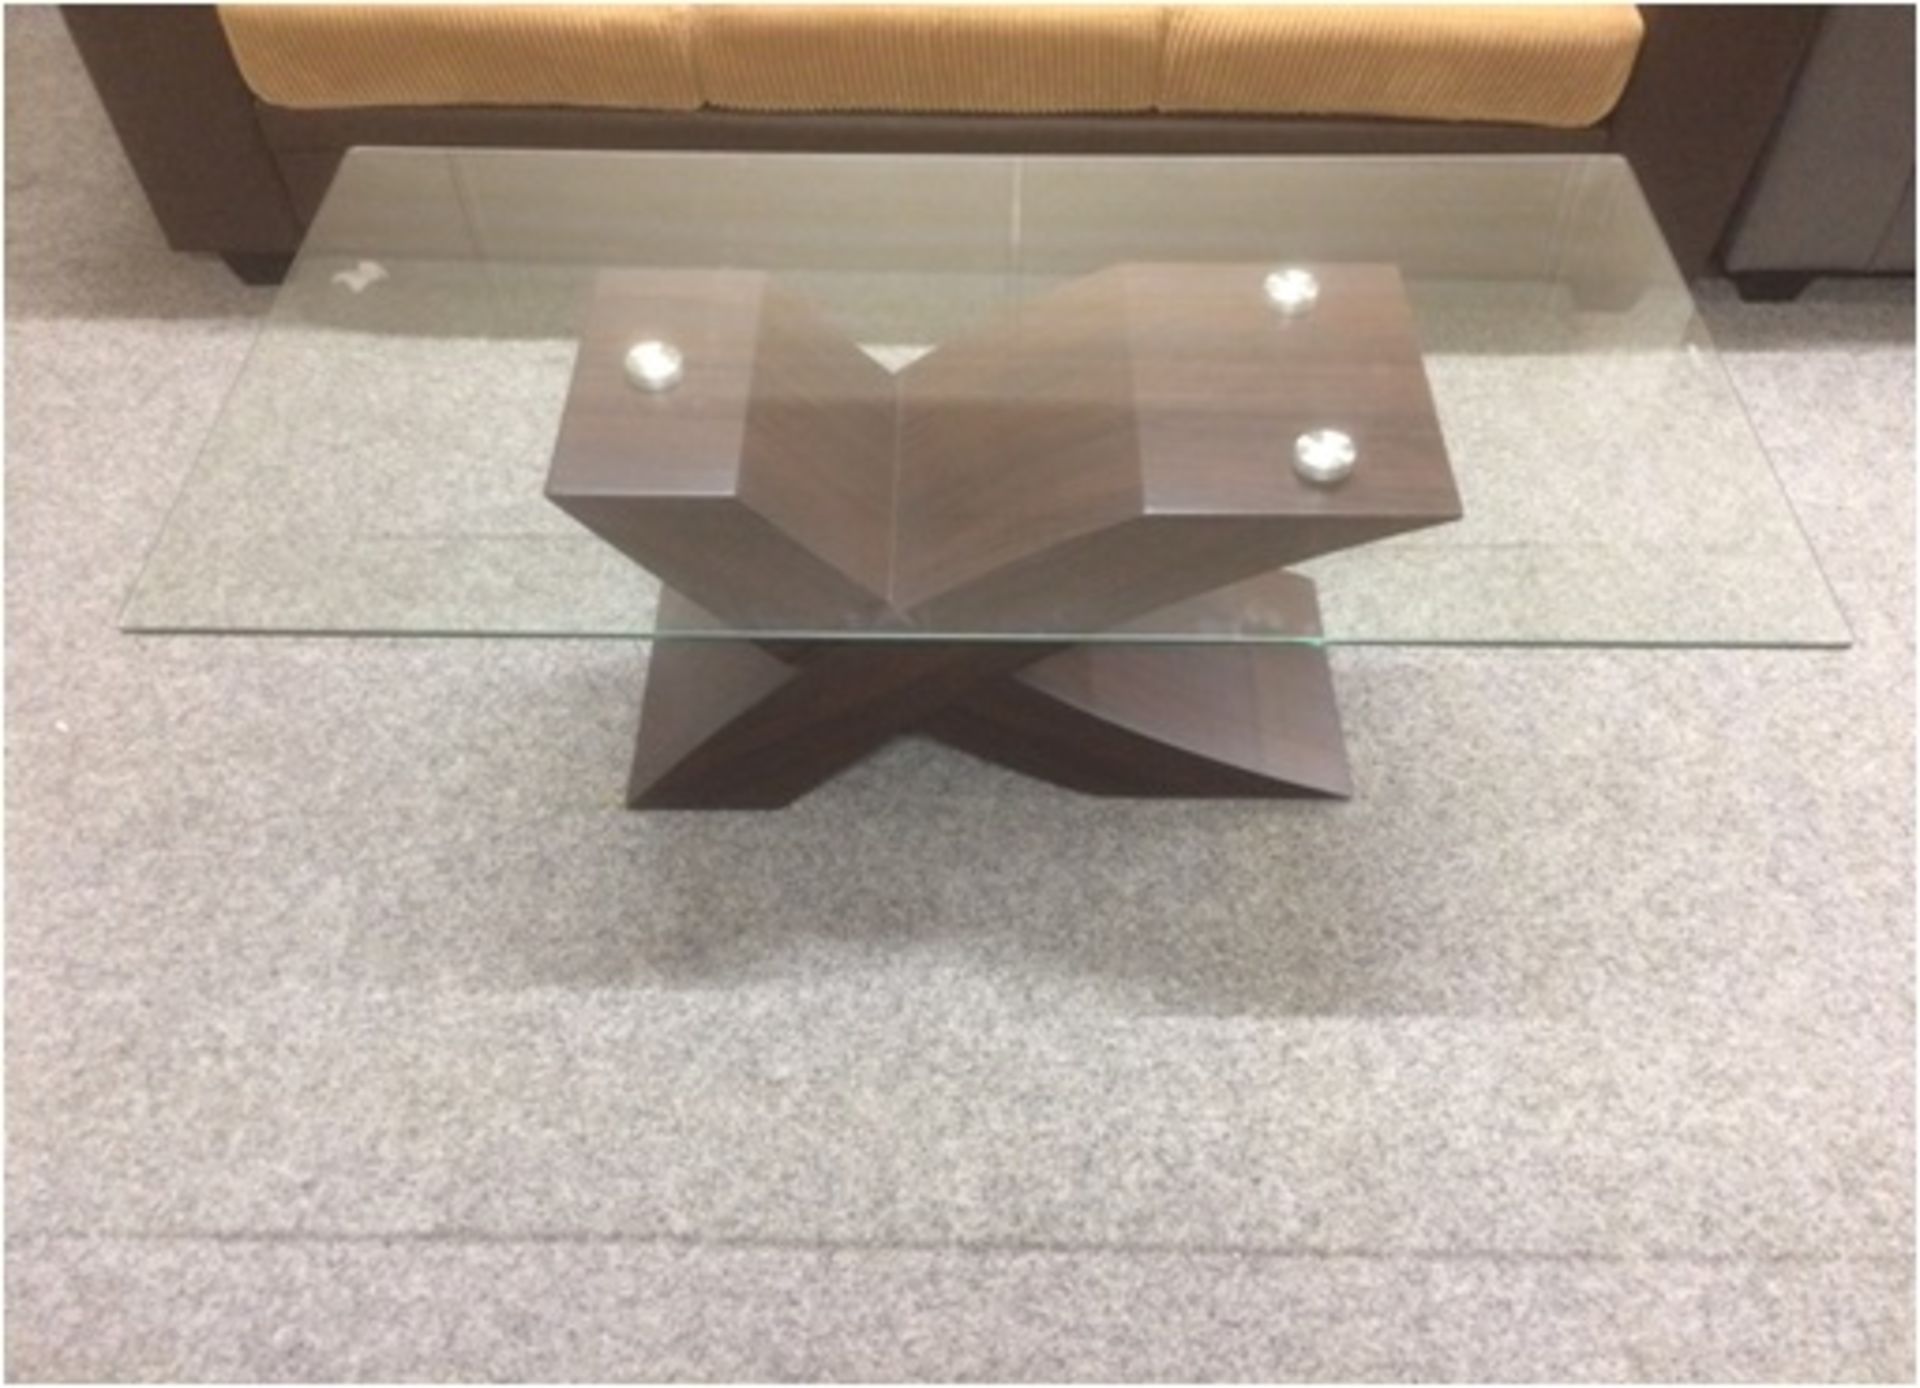 1 x Designer Glass Coffee Table - Walnut Base, CTB420Wlnt (Brand New & Boxed)